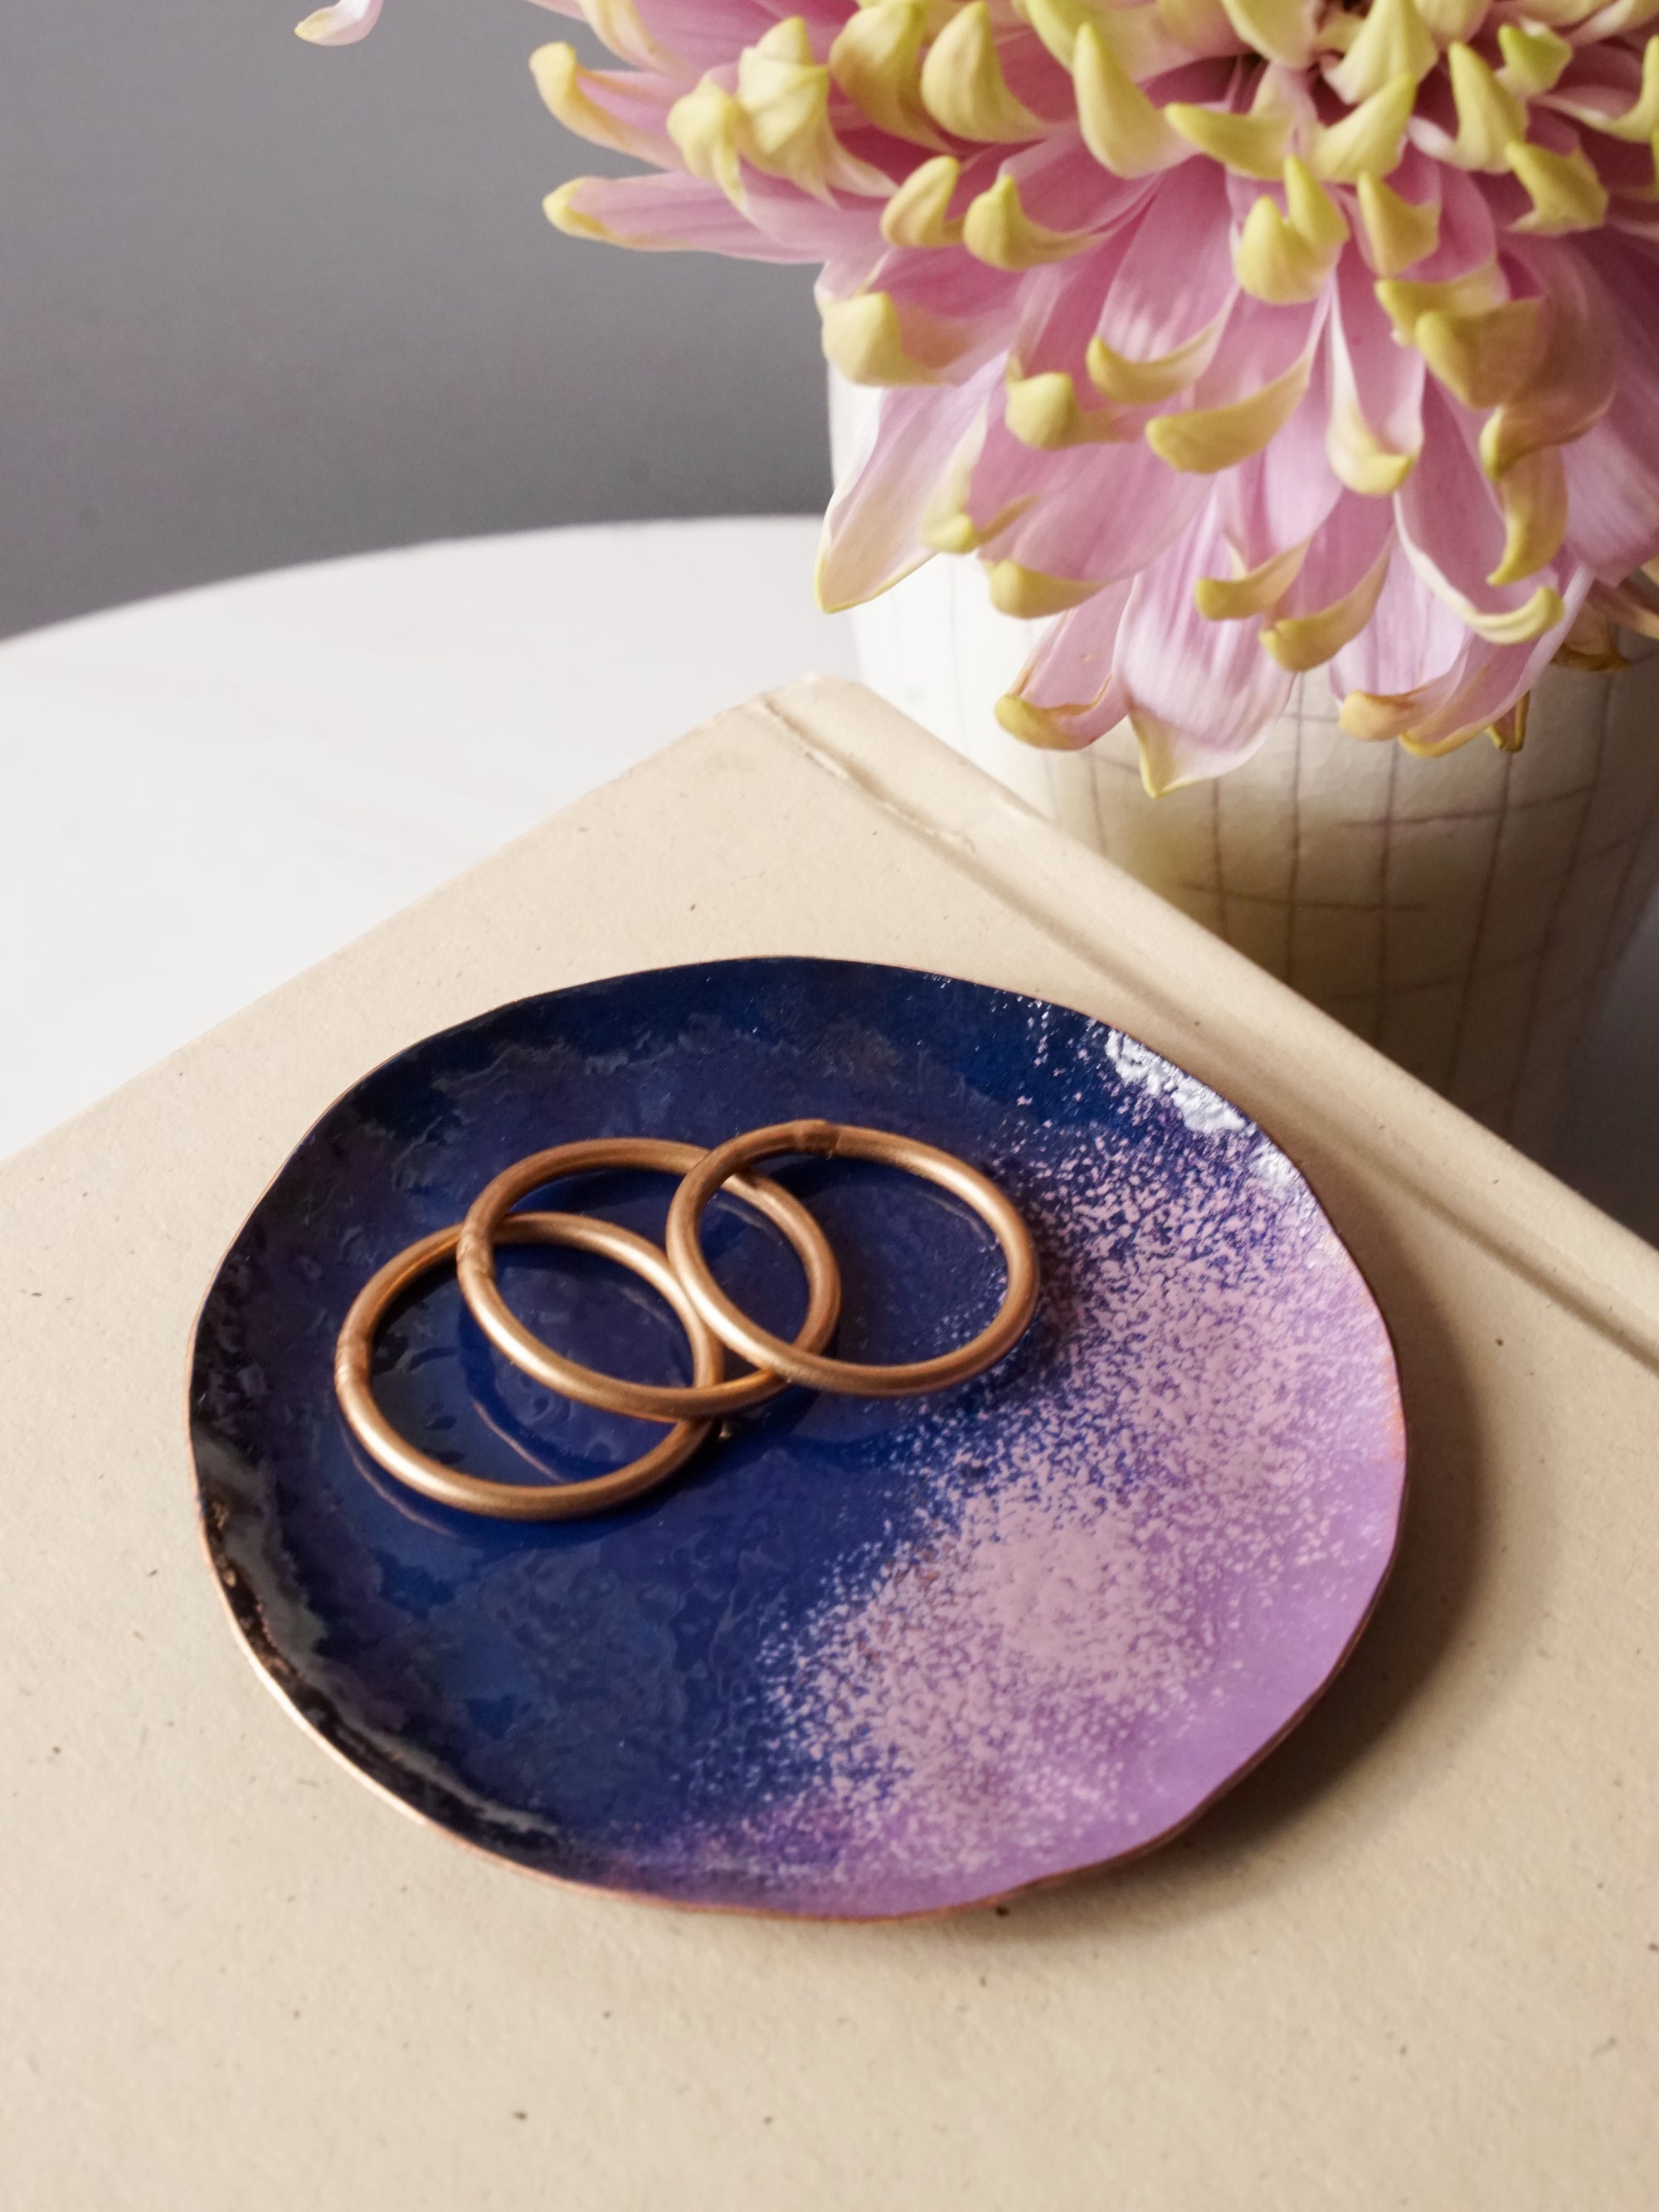 Chroma Colorful Little Round Metal Tray in Navy and Lavender